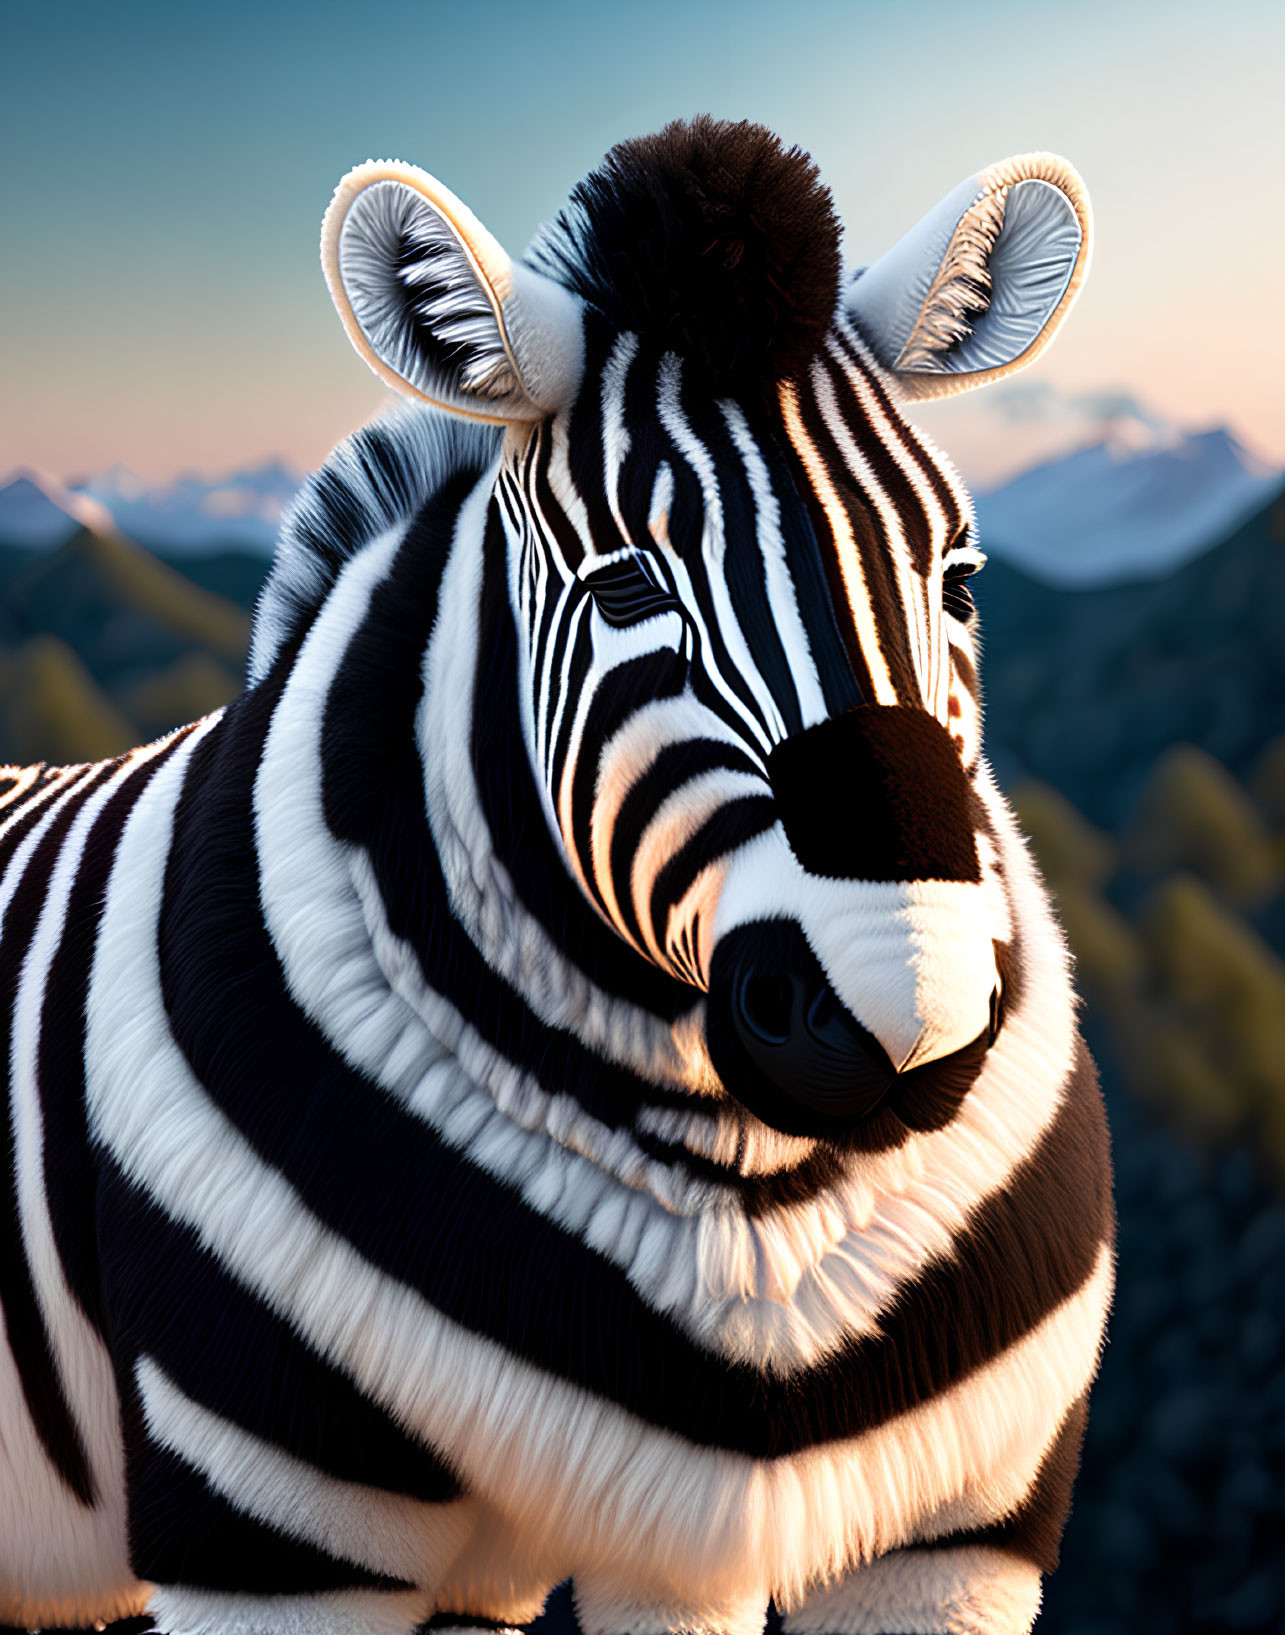 Detailed Close-Up of Striped Zebra Against Mountainous Sunset Background